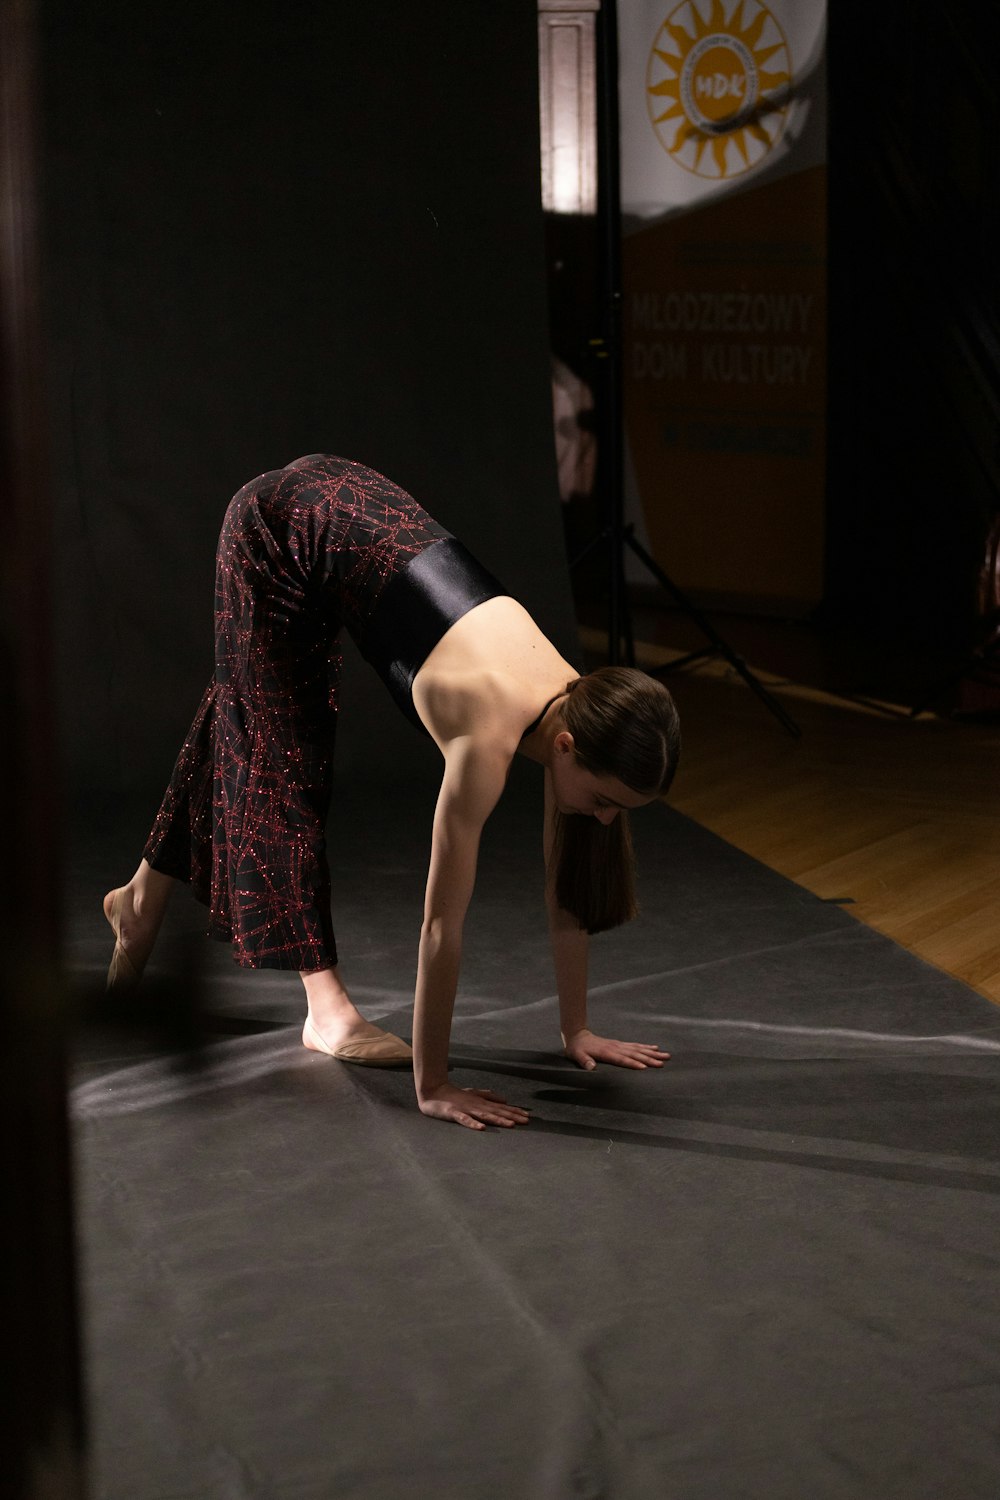 a woman is doing a handstand on the floor